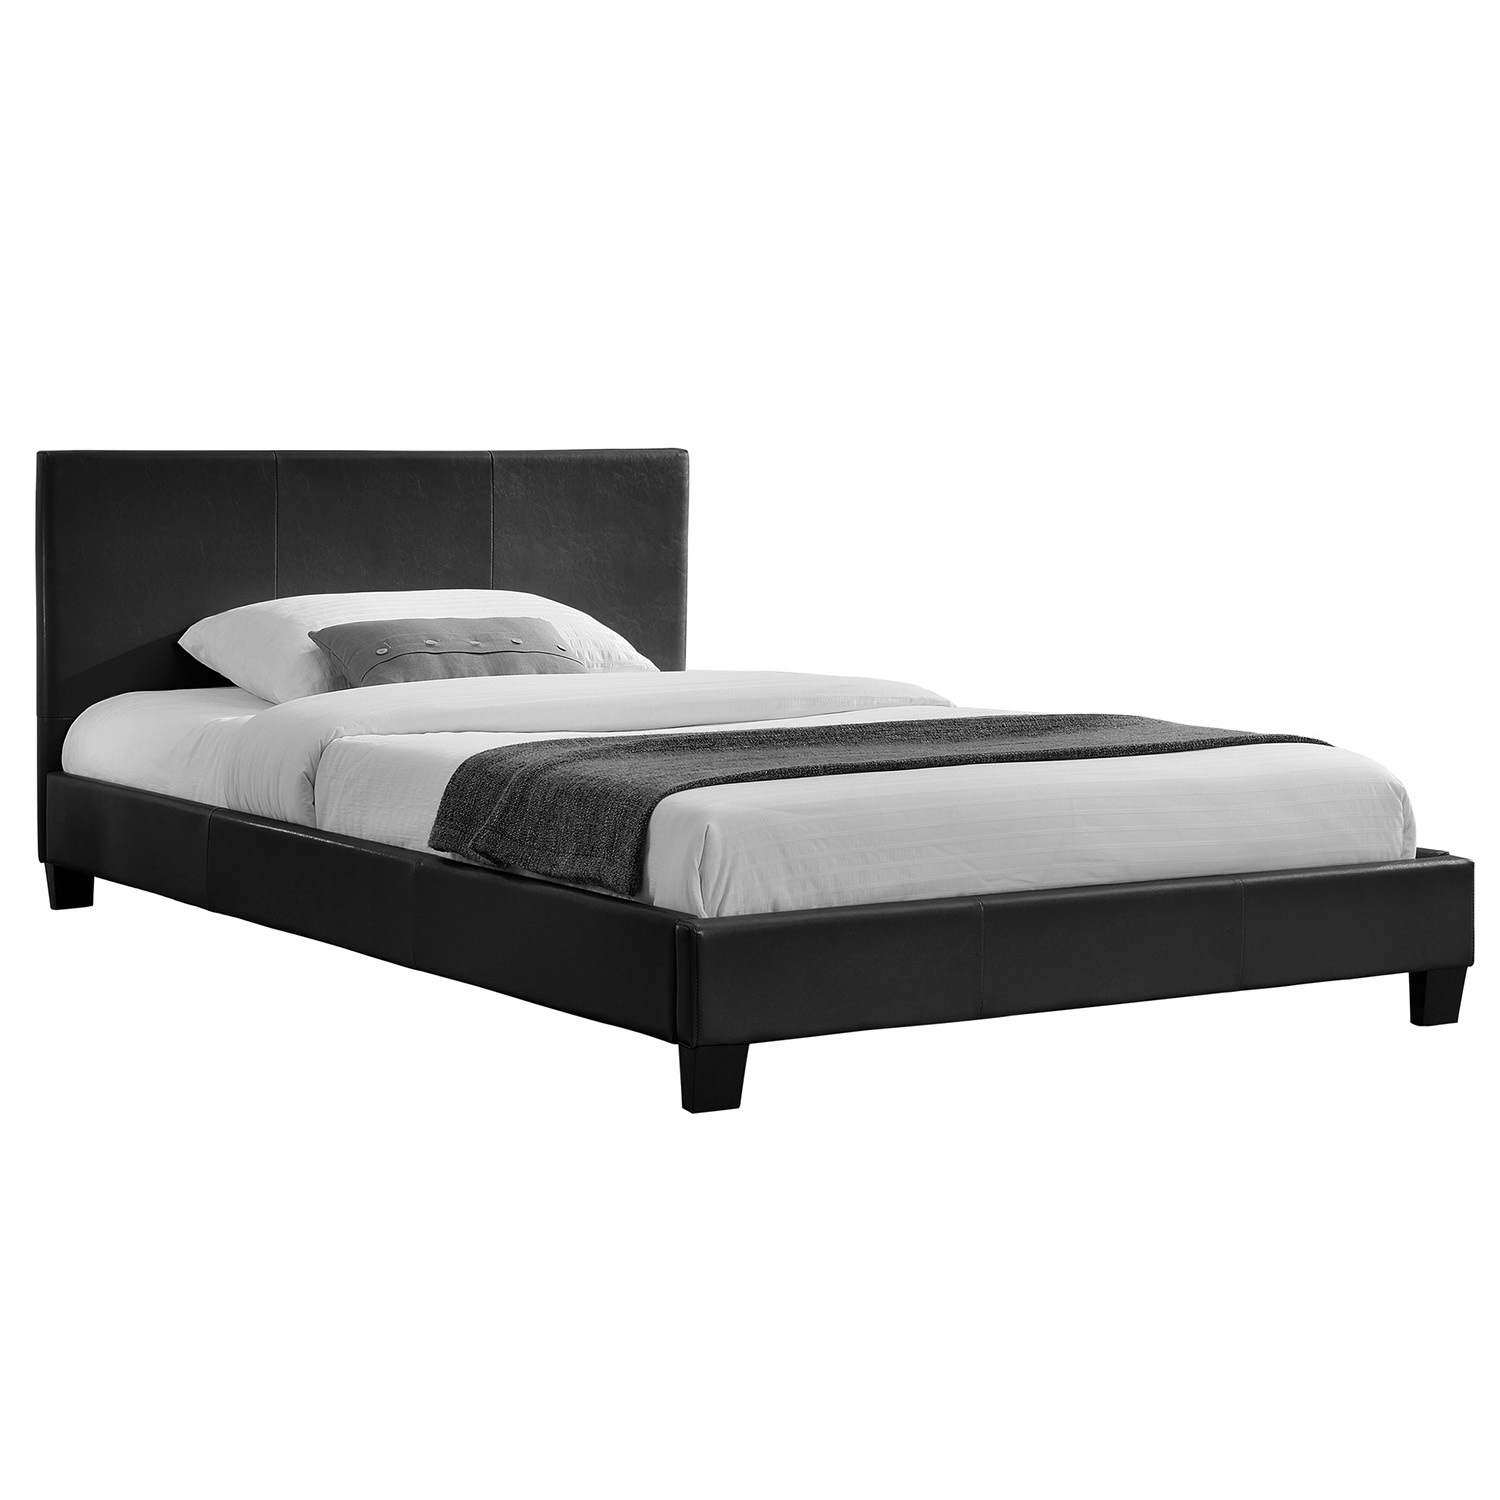 Black Makoto Faux Leather Bed Frame, Black And White Leather Bed Frame